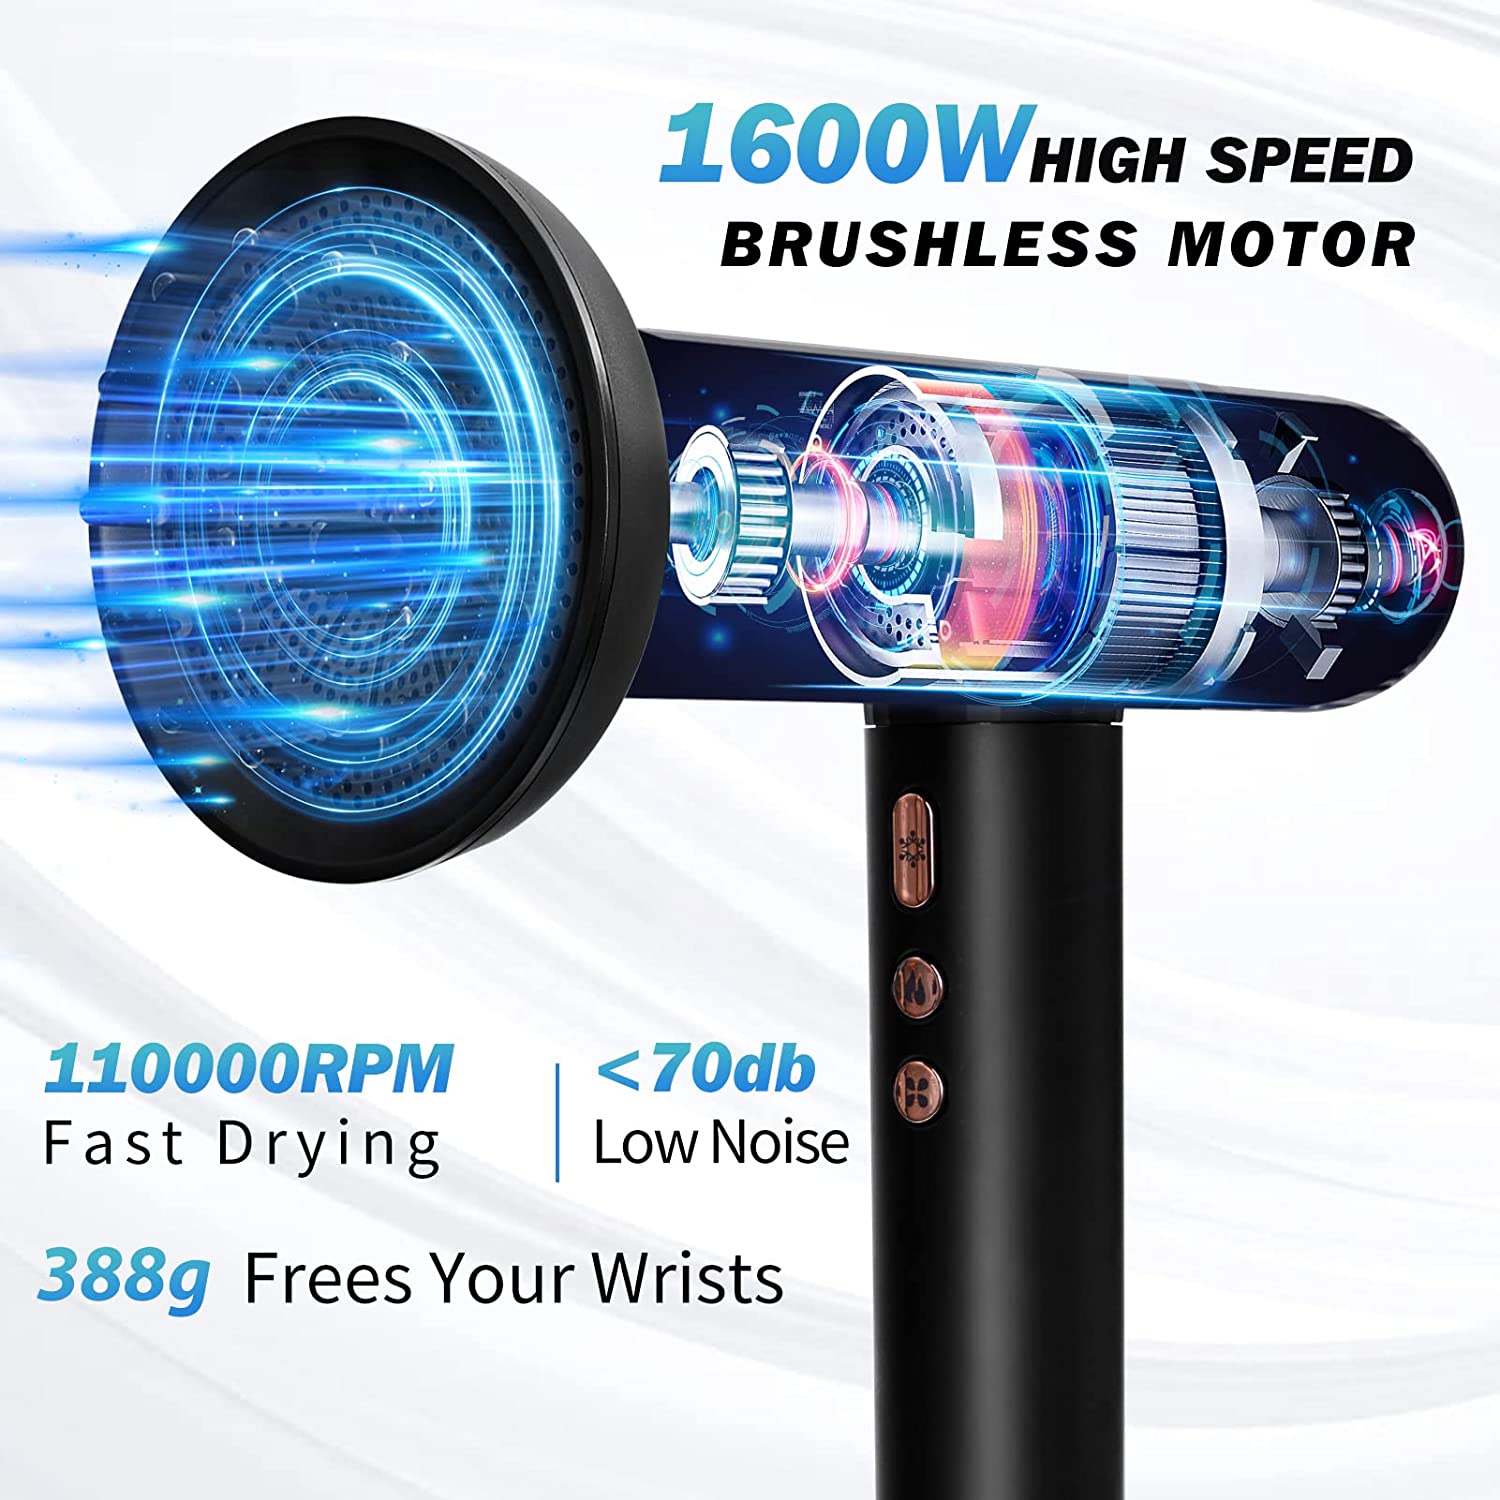 Nicebay Ionic Hair Dryer, 110000RPM High-Speed Brushless Motor for Fast Drying, Auto-Cleaning, Lightweight, Low Noise, 1600W Hairdryer with Diffuser